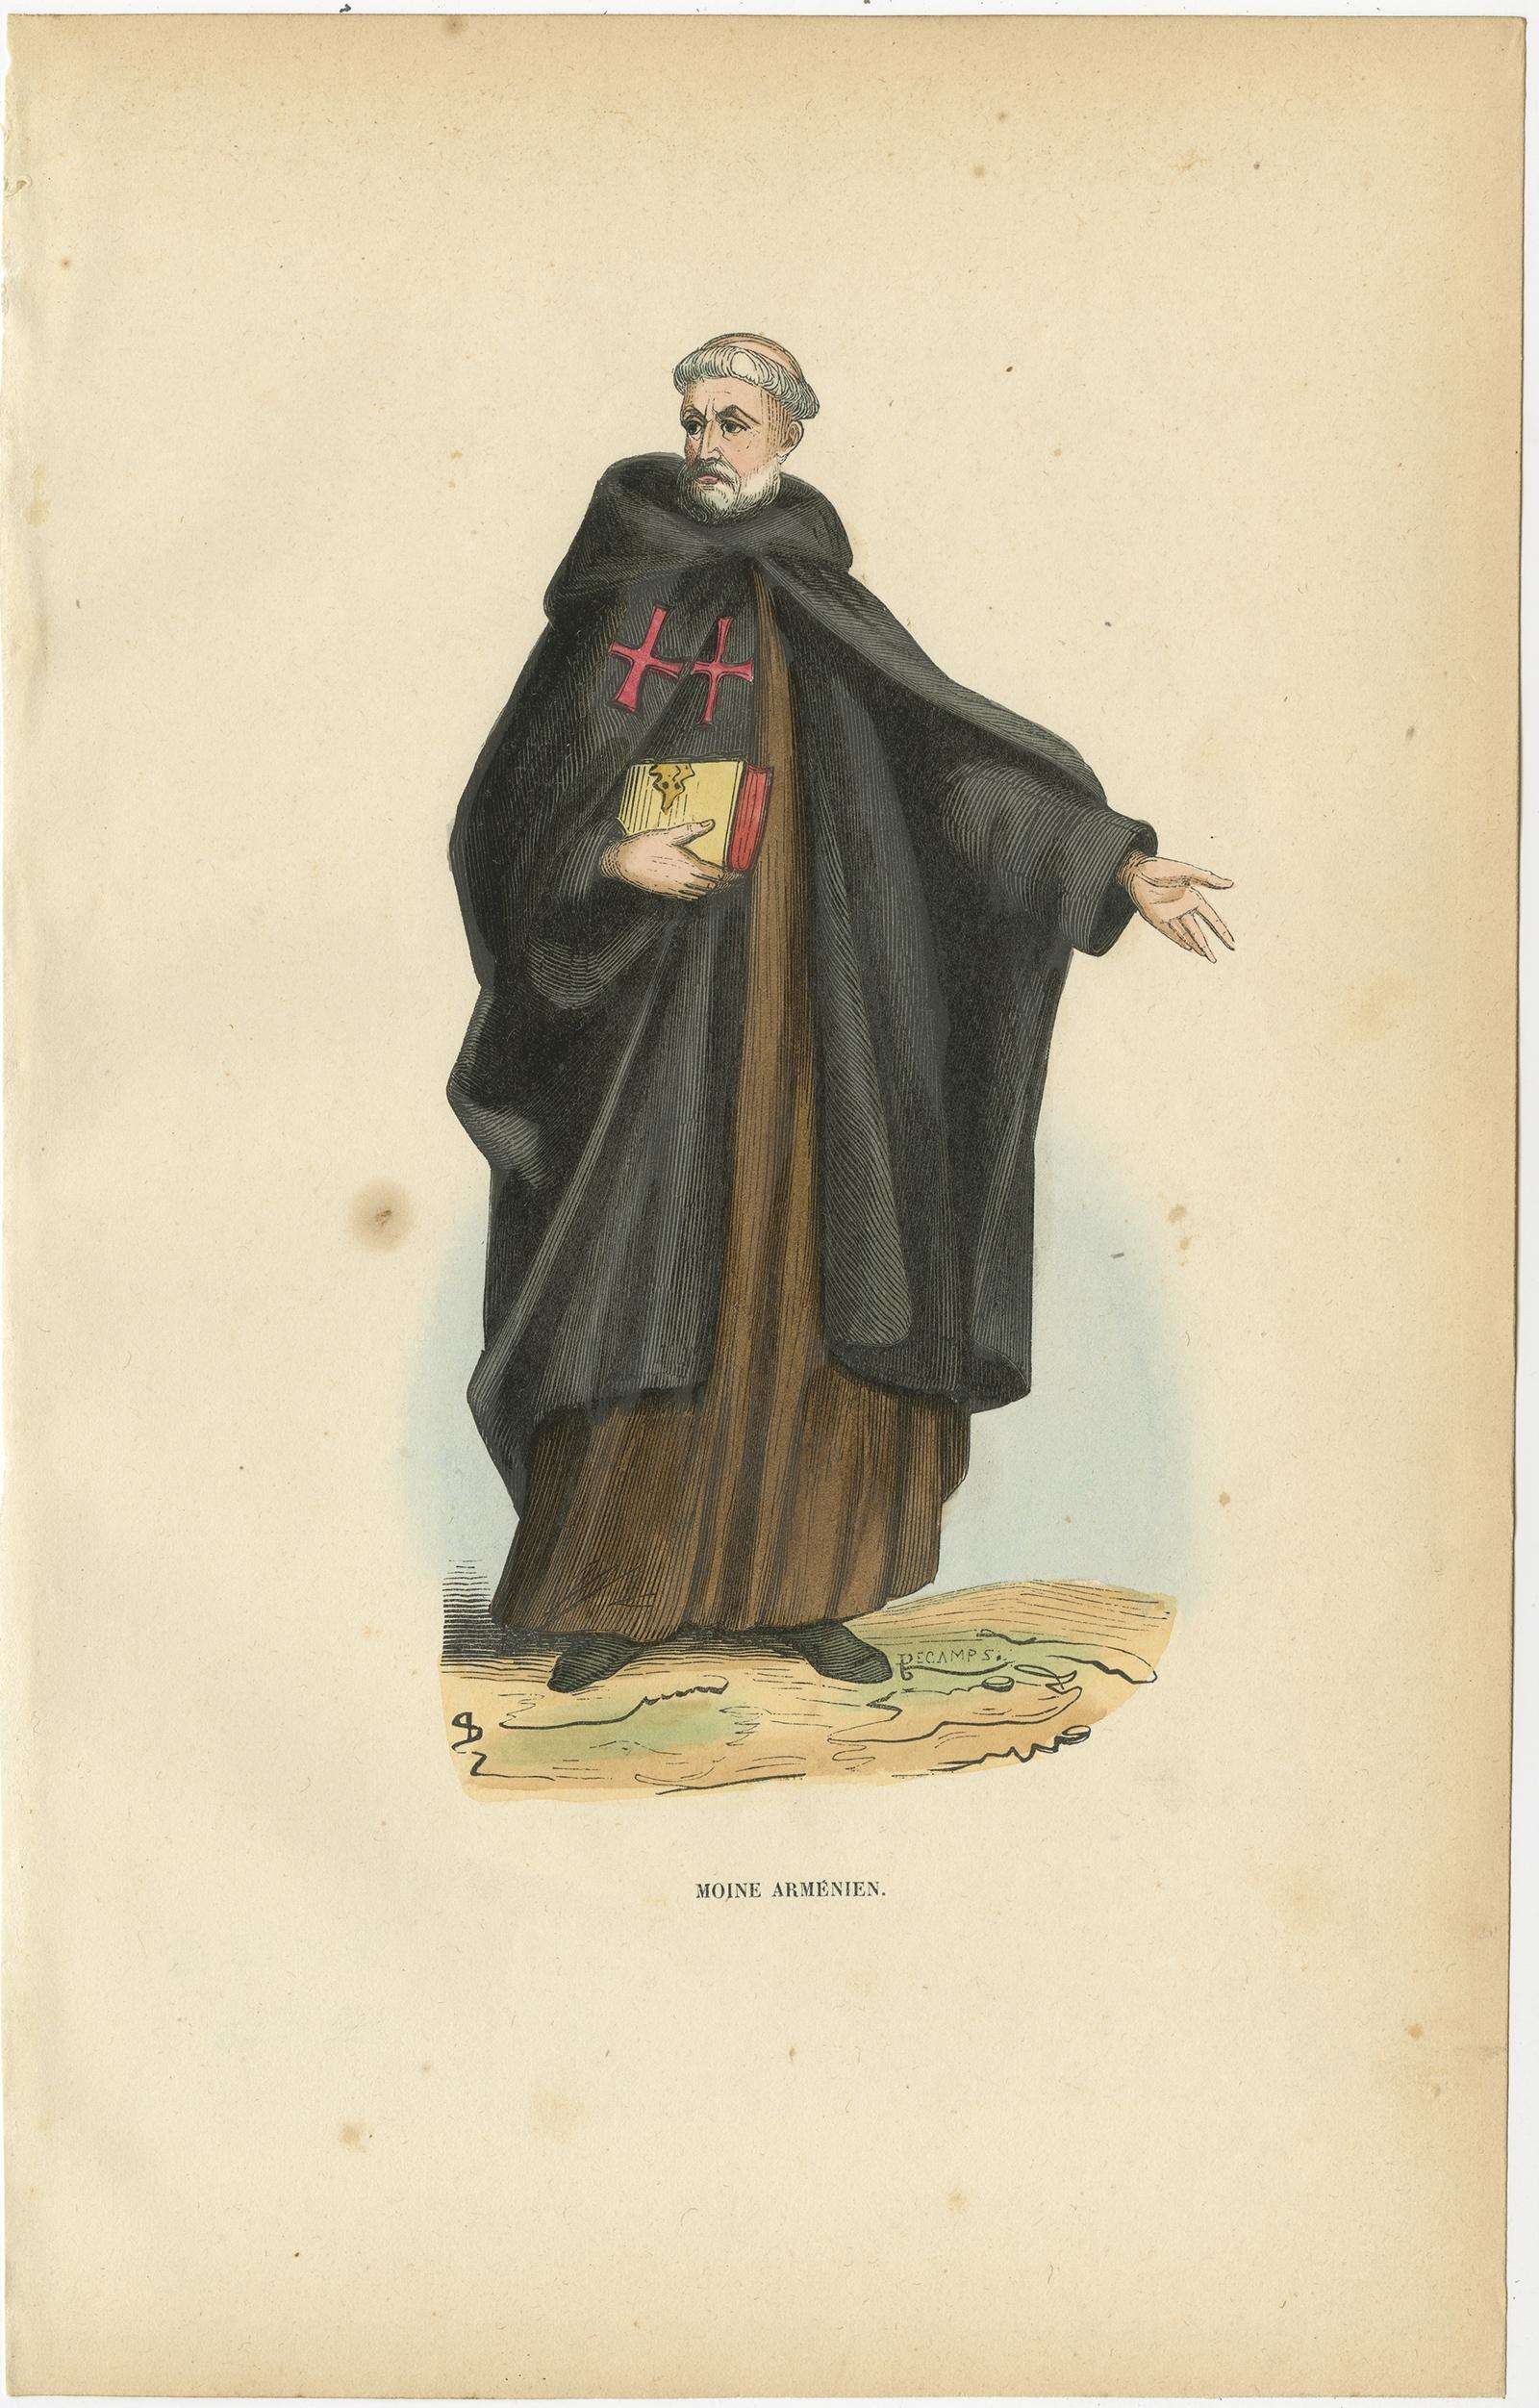 Antique print titled 'Moine Arménien' or Armenian Monk.

The nowadays Mekhitarists or Mechitarists are a monastic order of the Armenian Catholic Church founded in 1700 by Abbot Mekhitar of Sebaste. They are best known for their series of scholarly